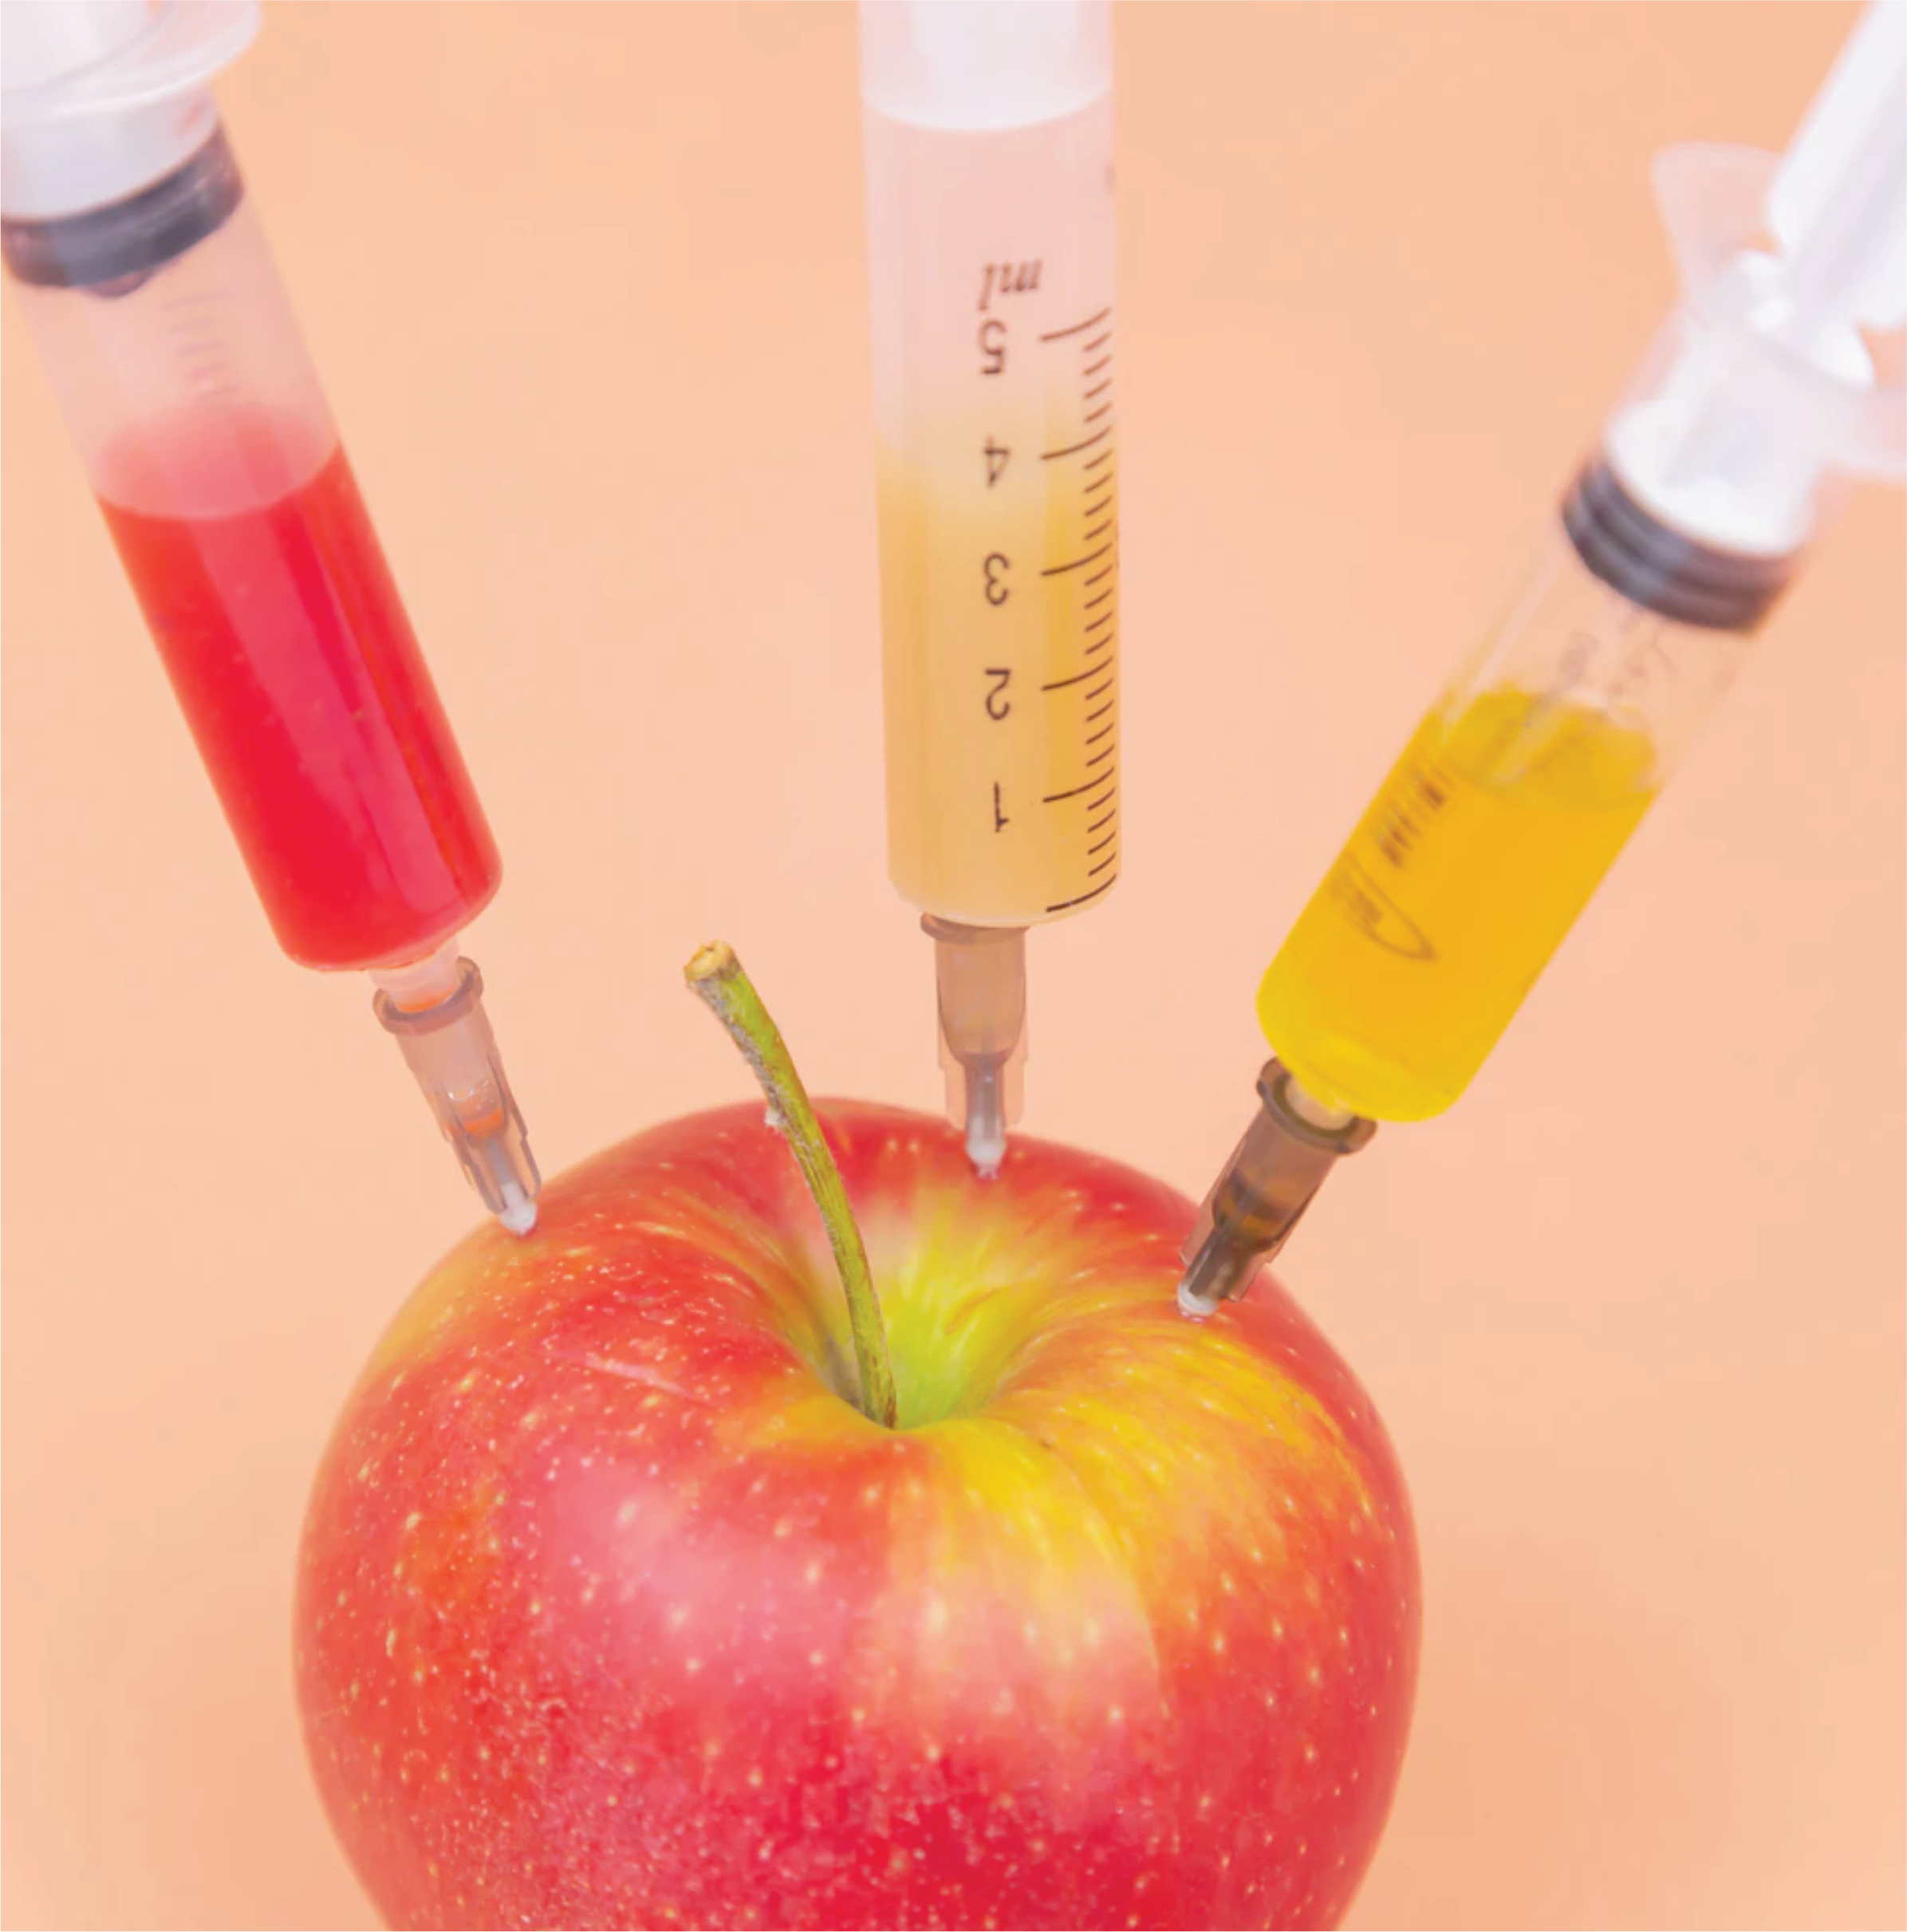 syringes injecting an apple